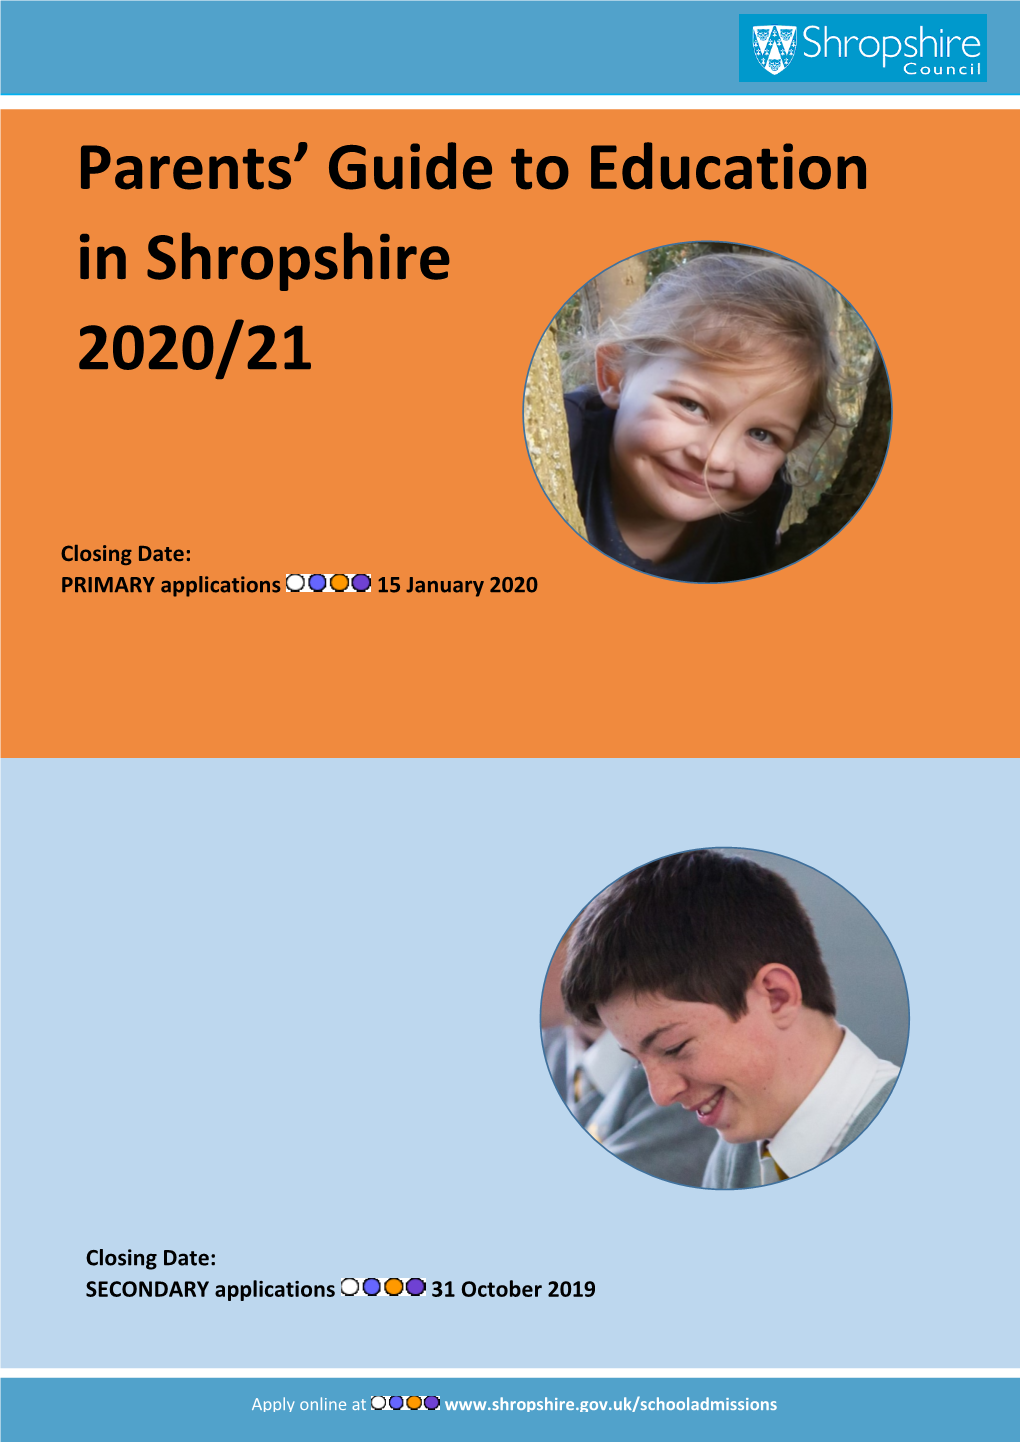 Parents' Guide to Education in Shropshire 2020/21